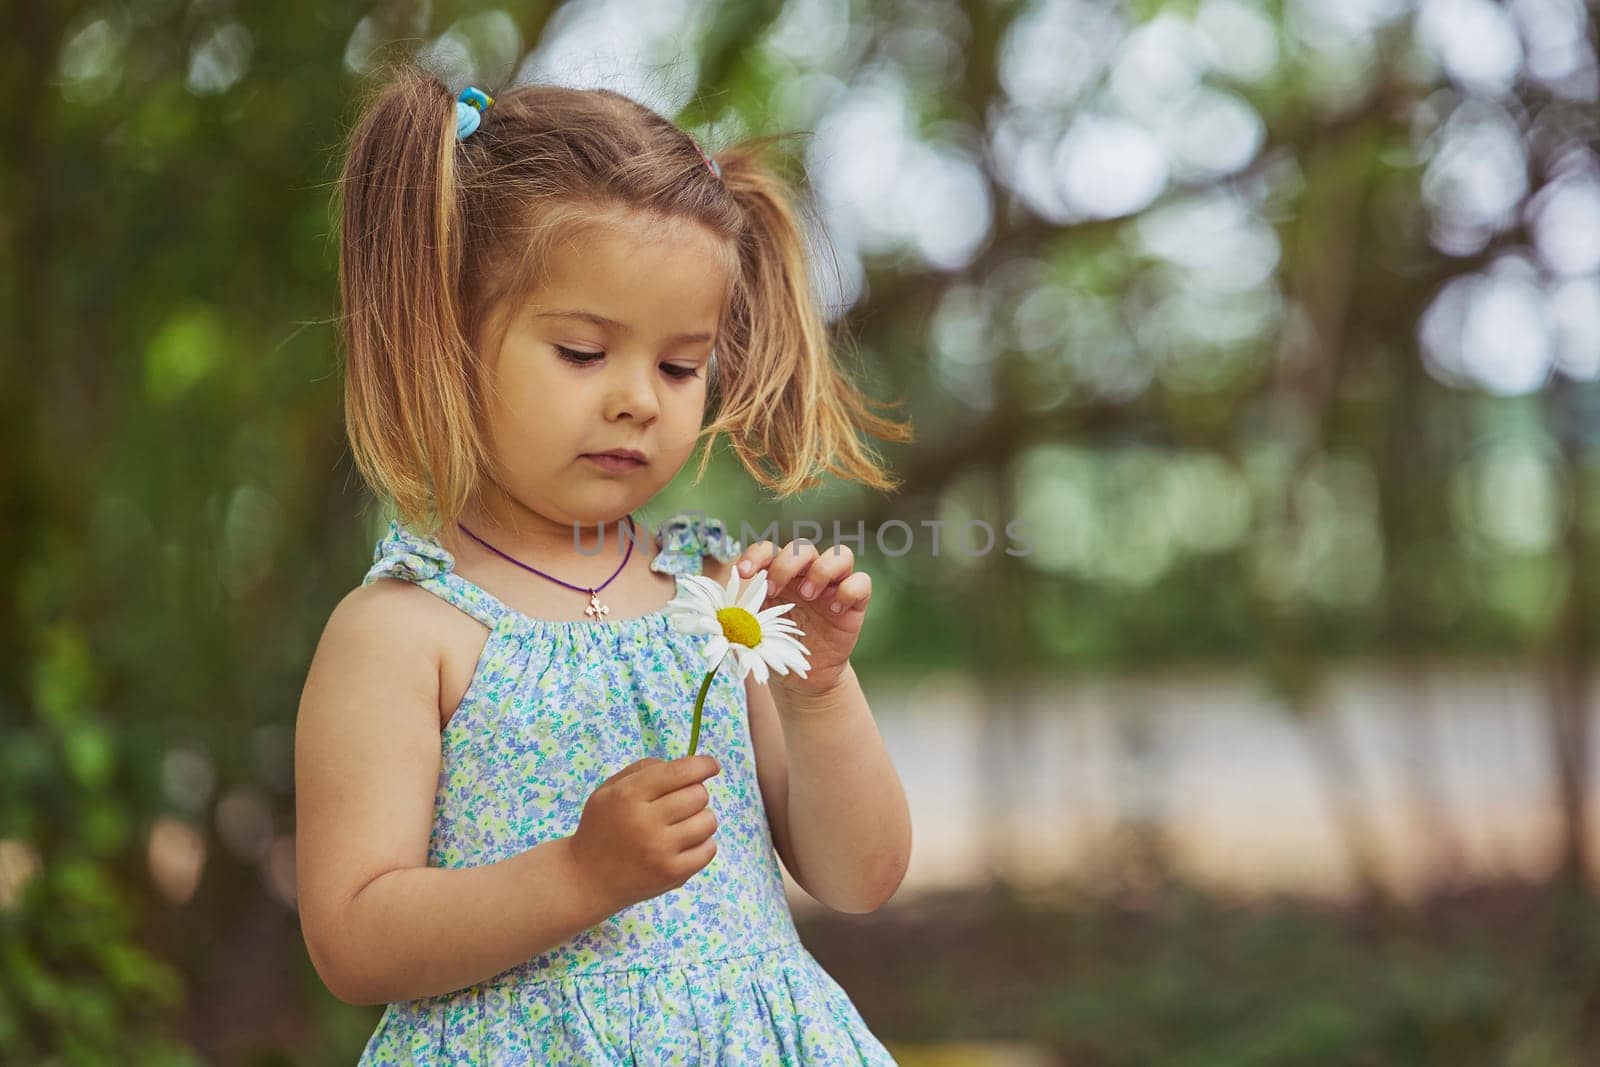 charming child in sundress tearing off flower petals while playing - loves or dislike